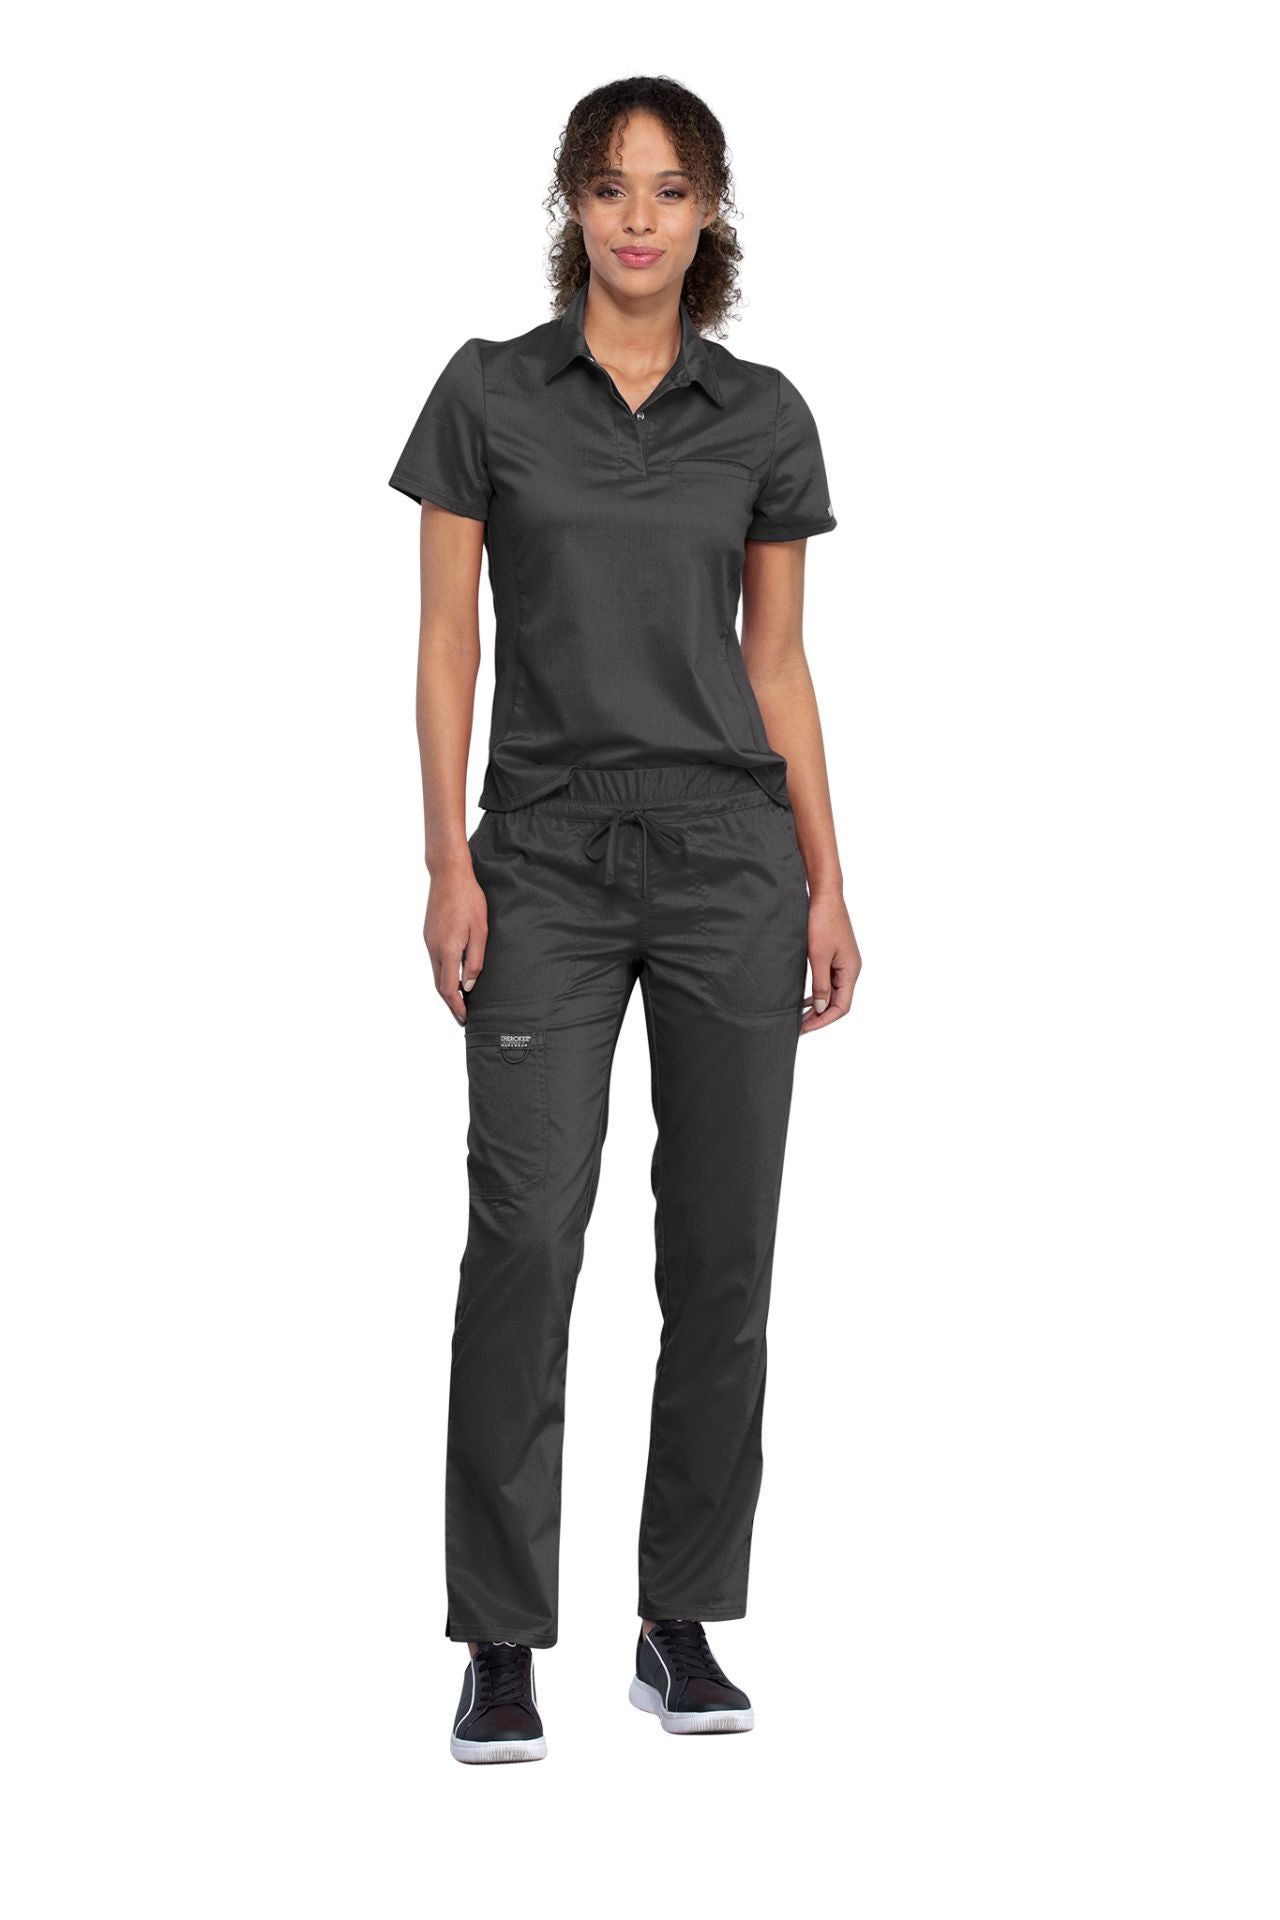 Pewter - Cherokee Workwear Revolution Snap Front Polo Shirt